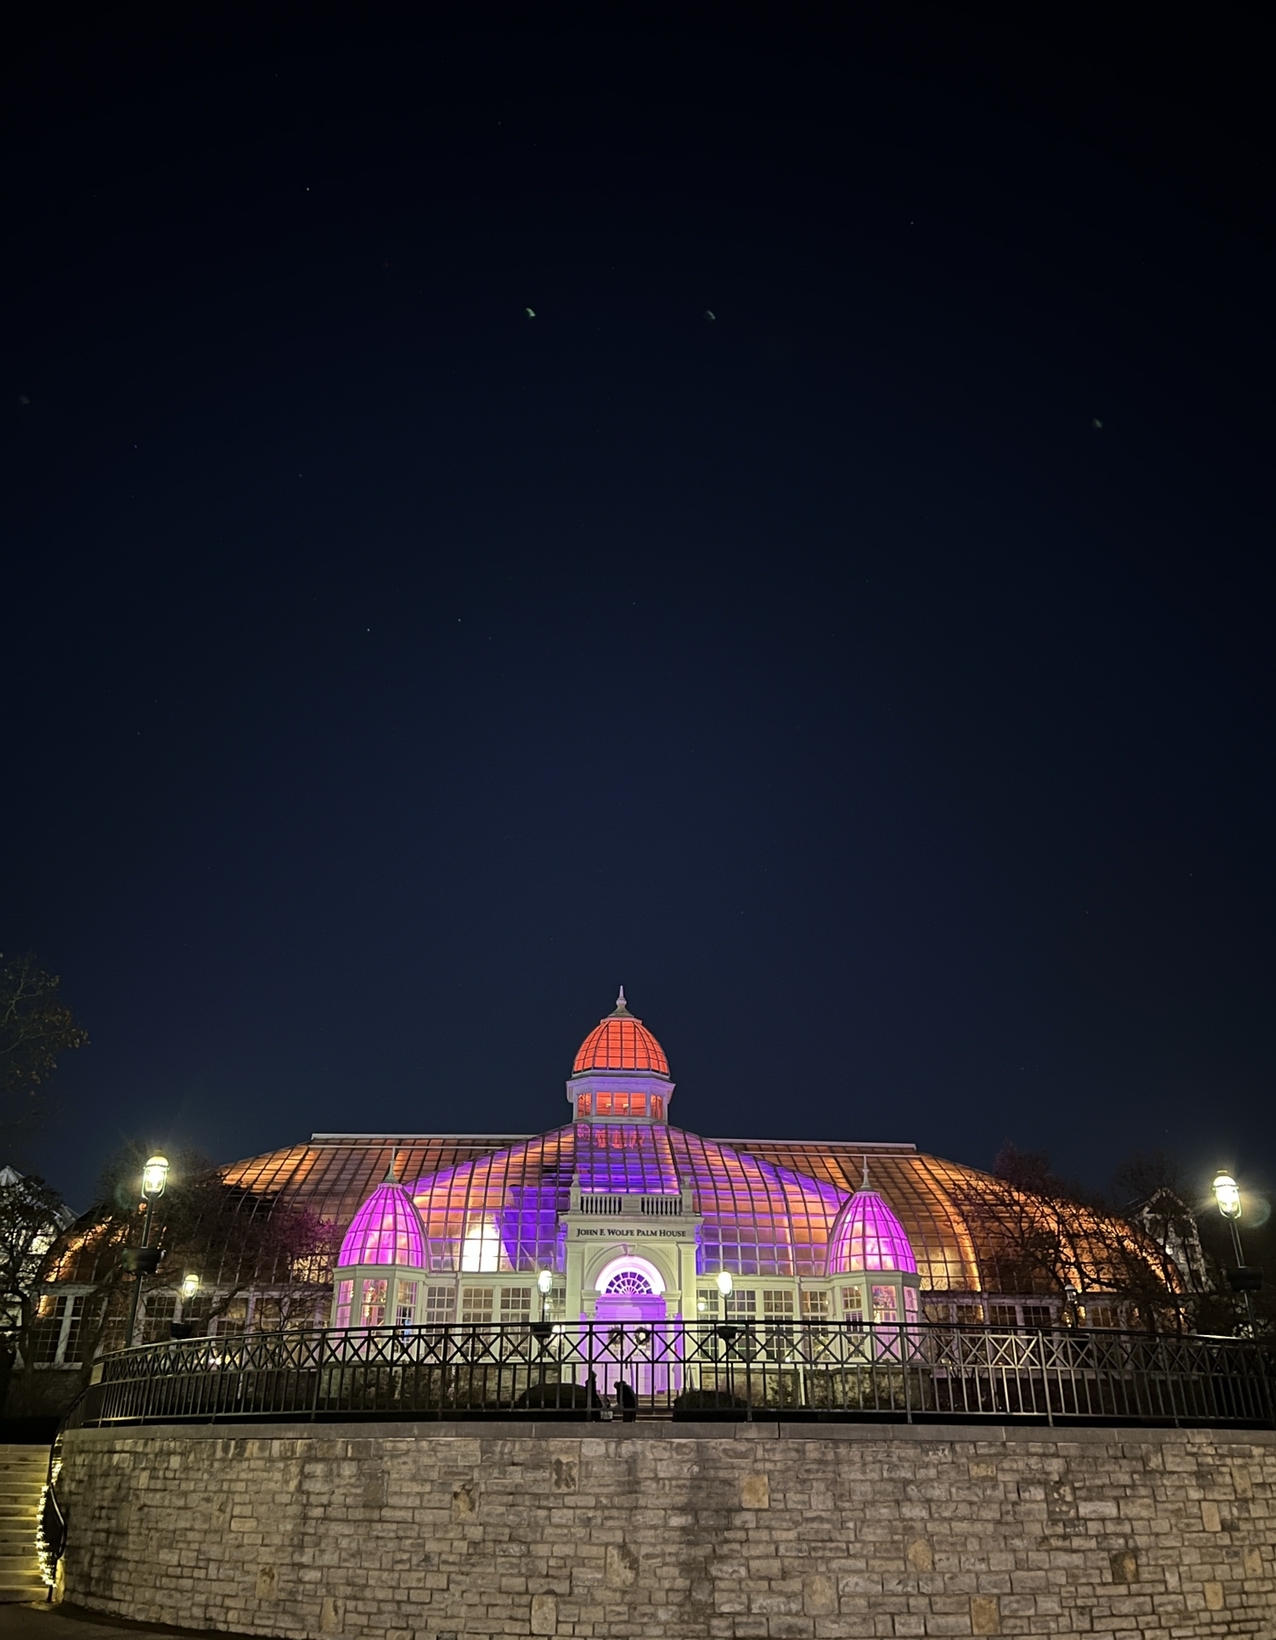 Spend a Magical Day at Franklin Park Conservatory and Botanical Gardens this Holiday Season